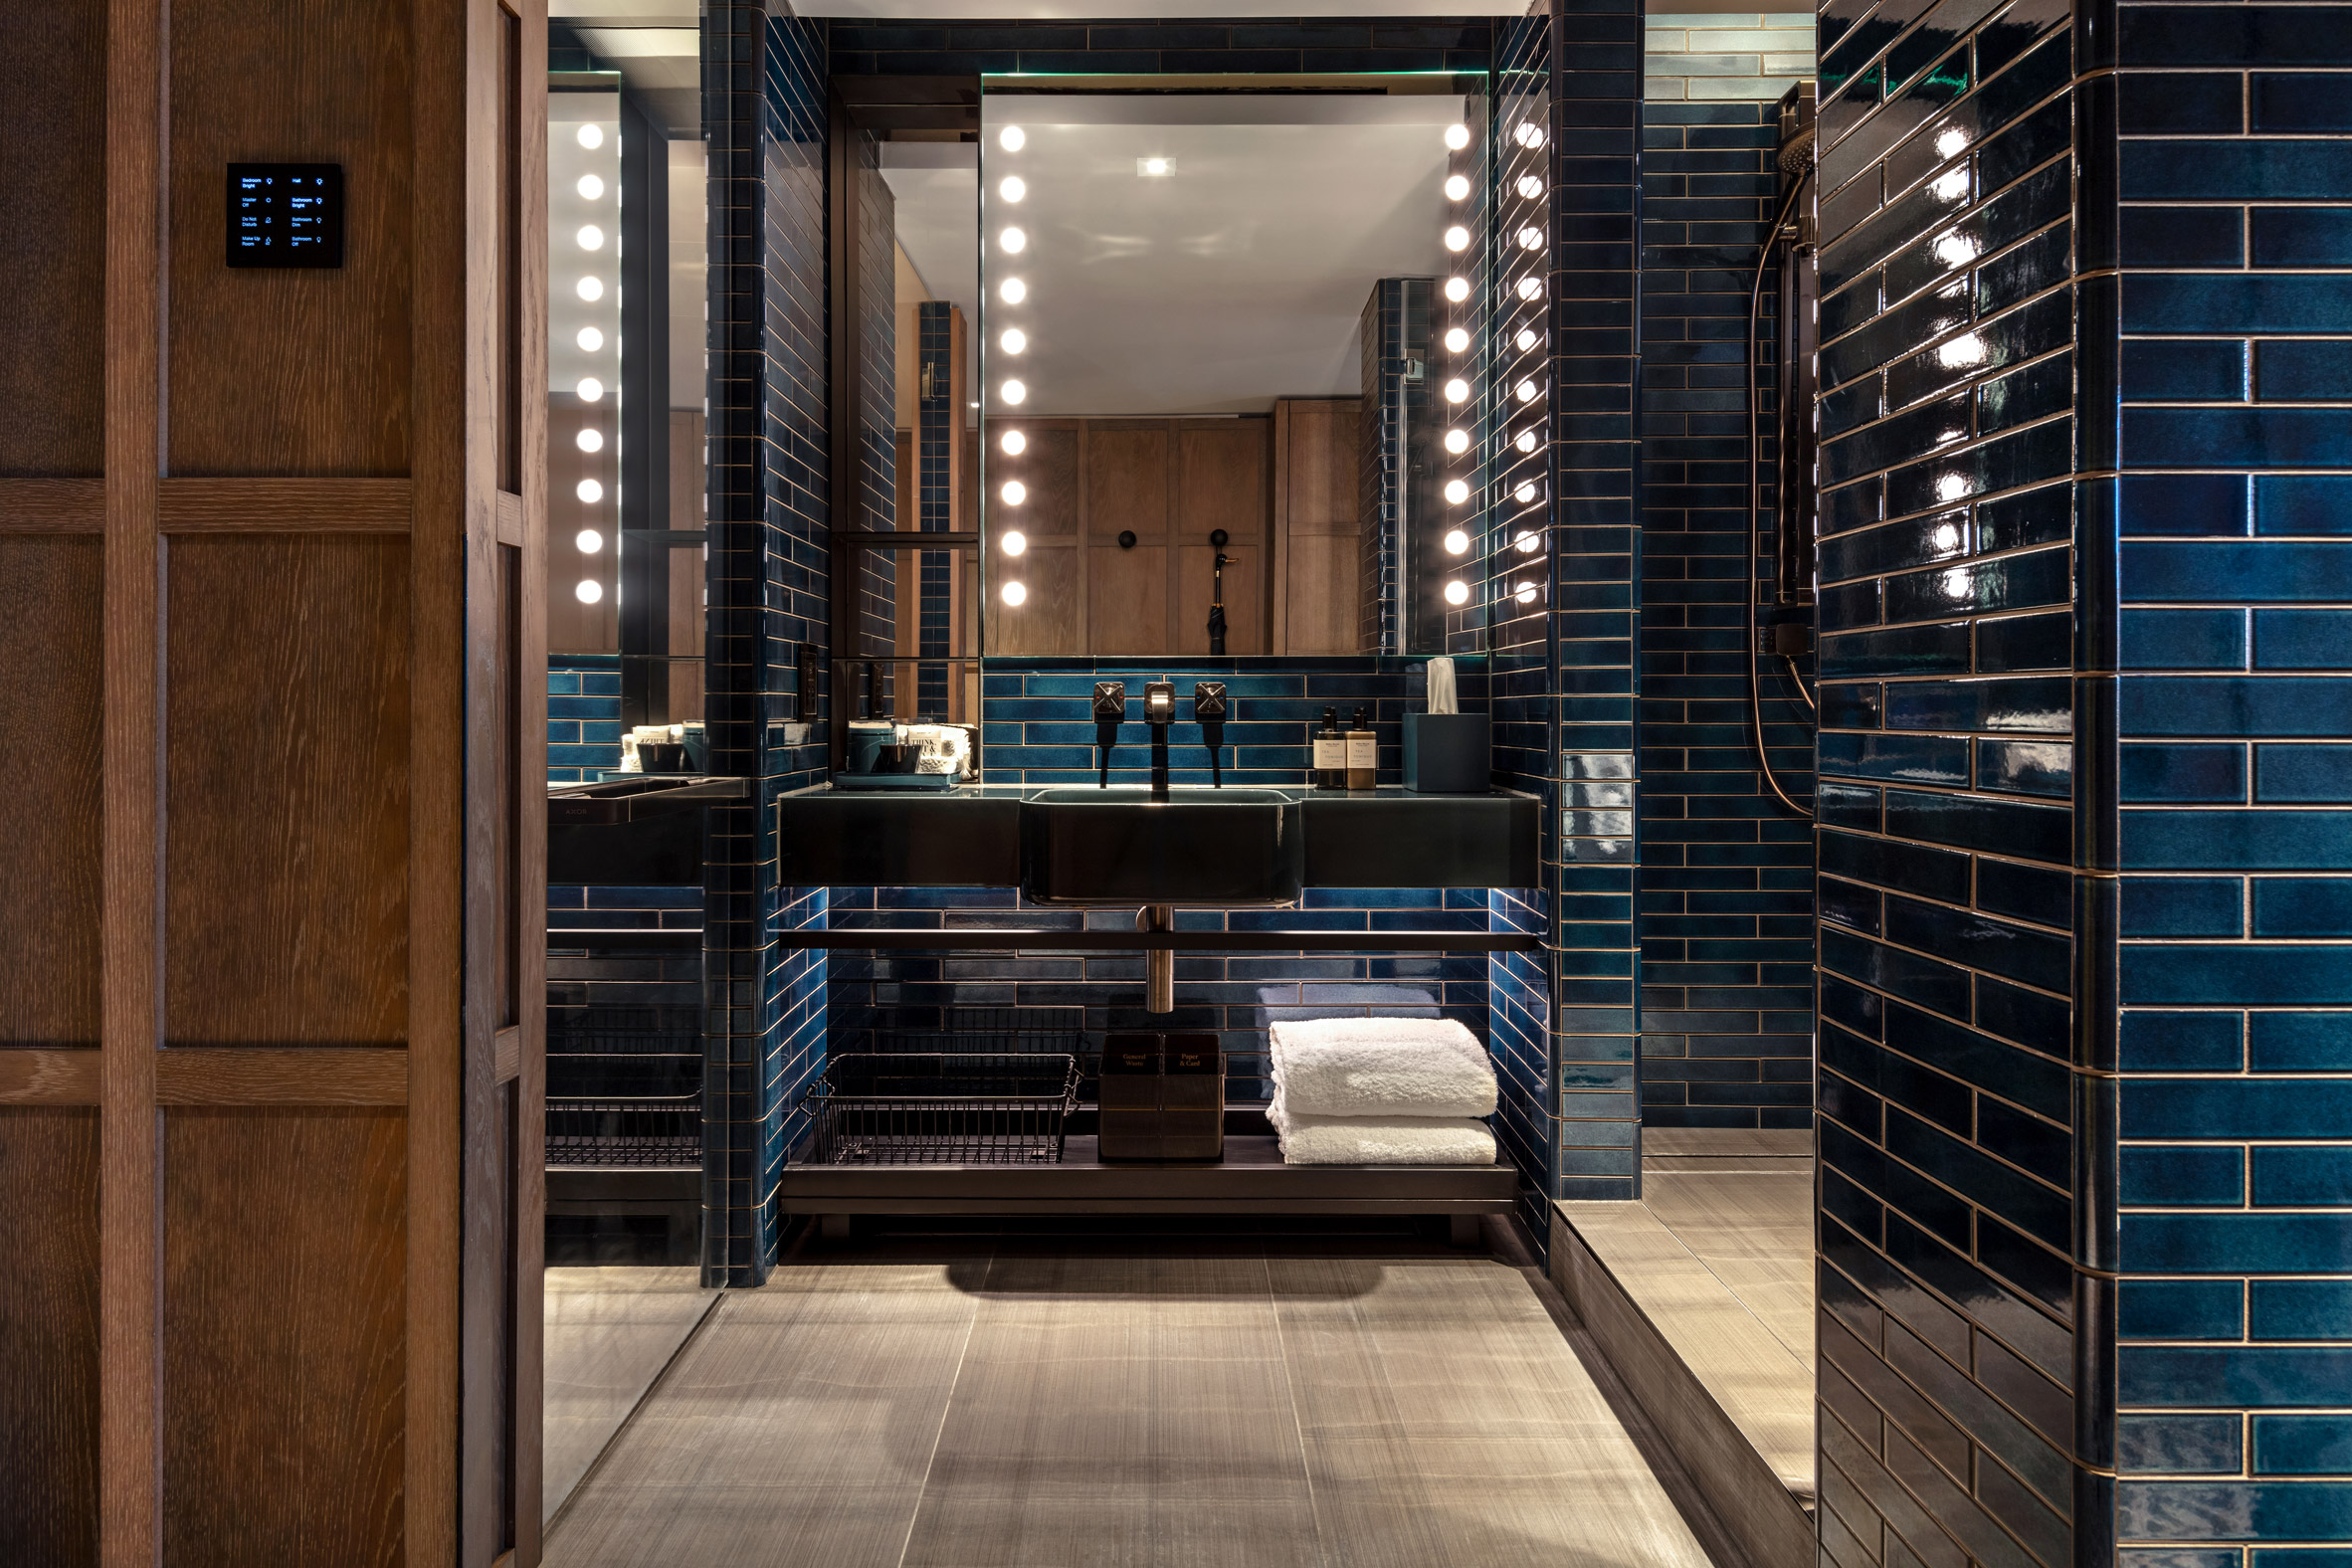 A photograph of The Londoner's bathroom featuring navy tiles